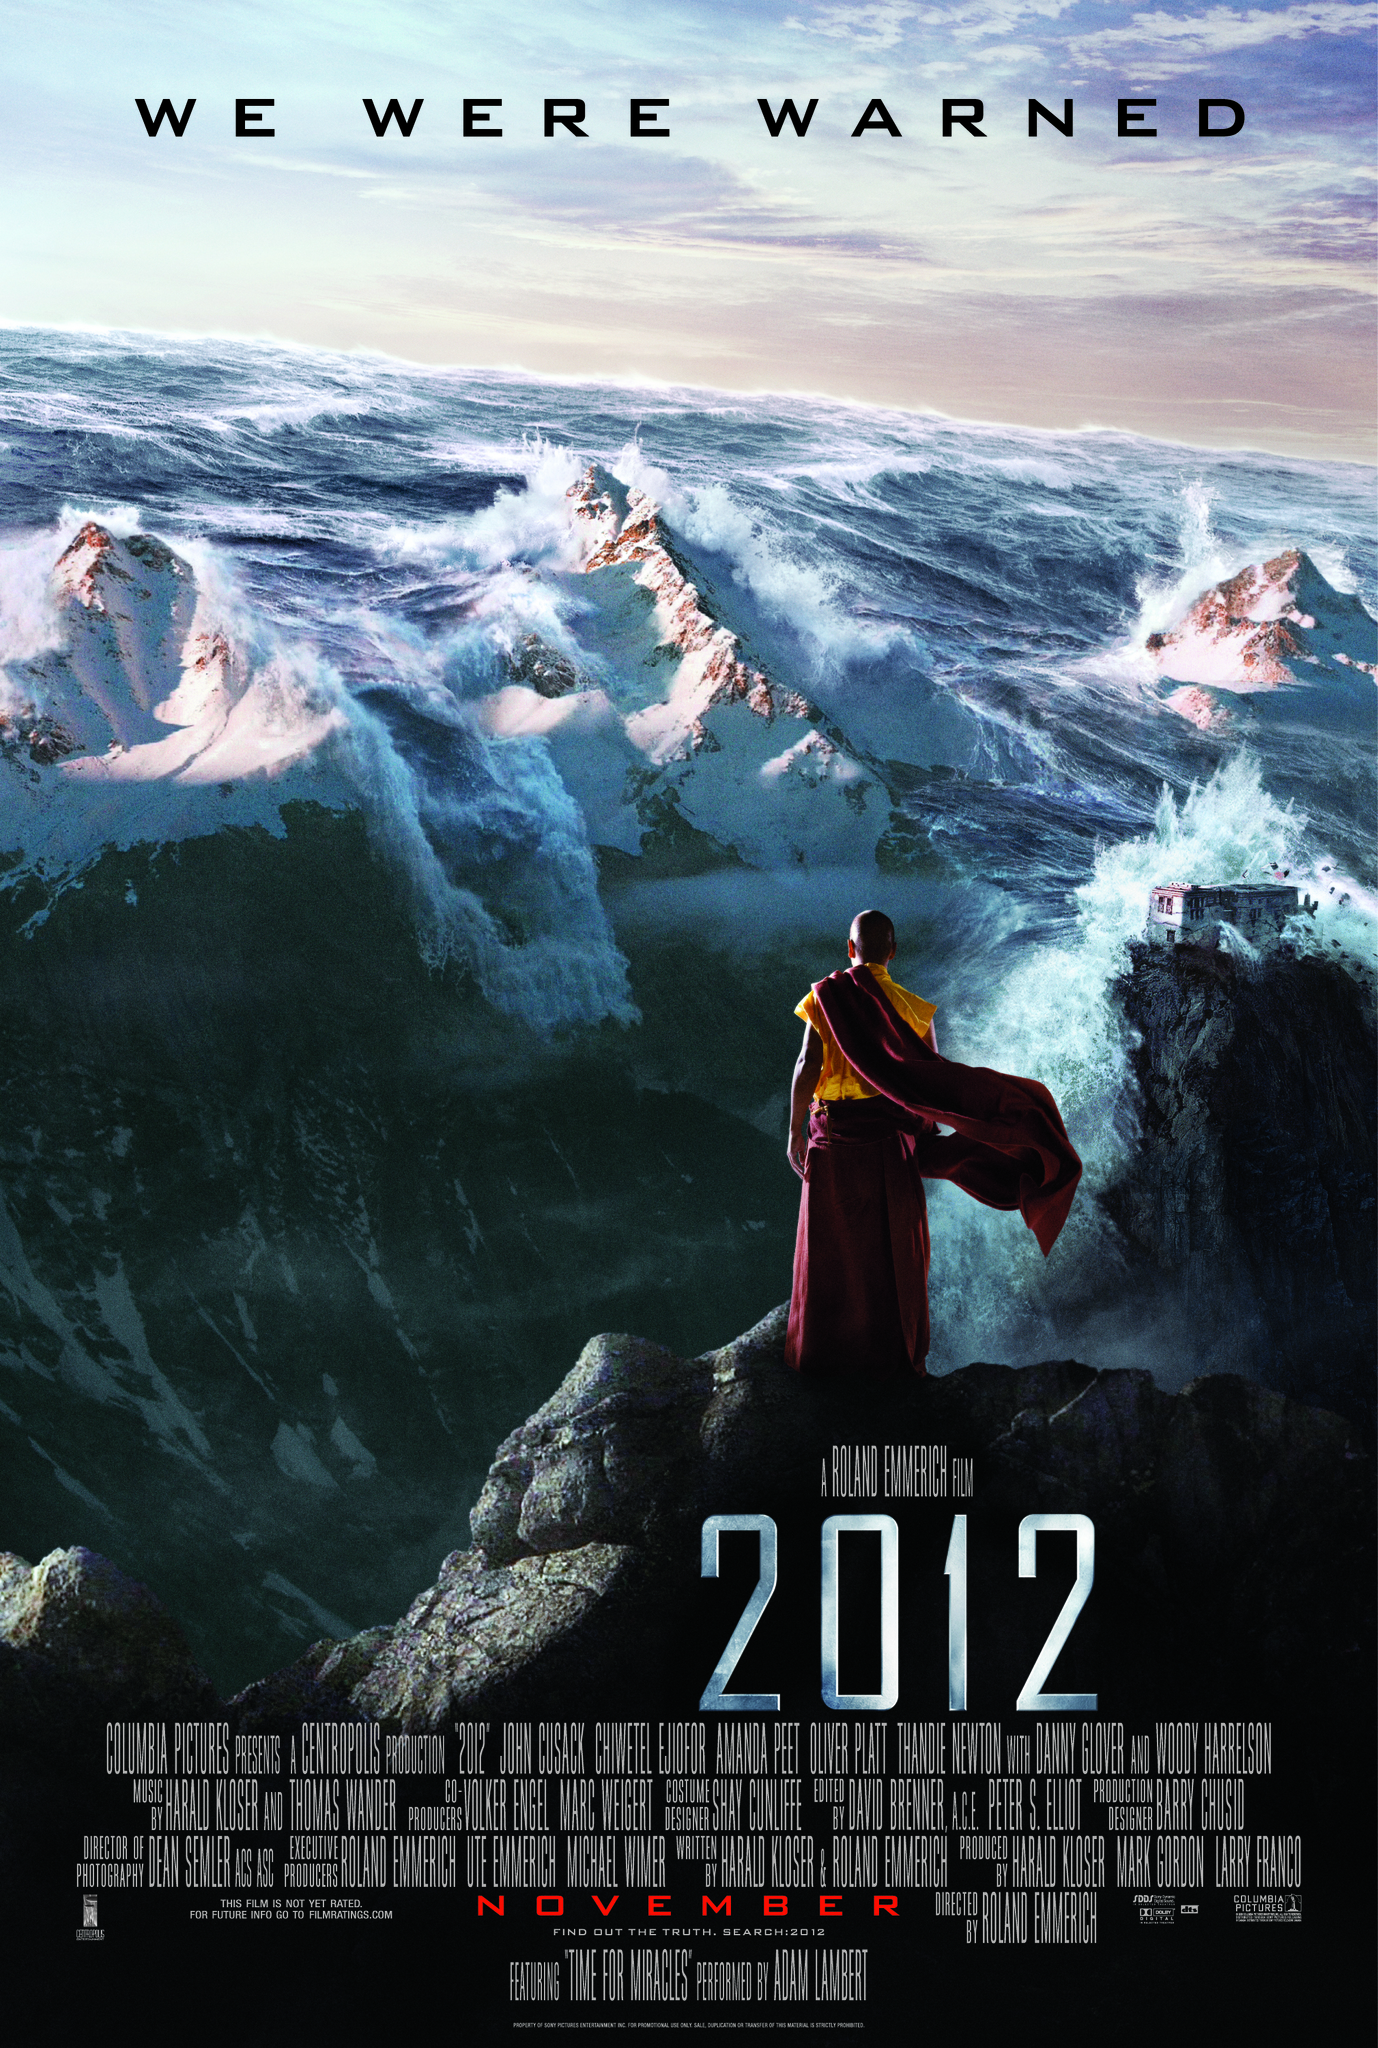 2012 end of the world movie free download in hindi mp4